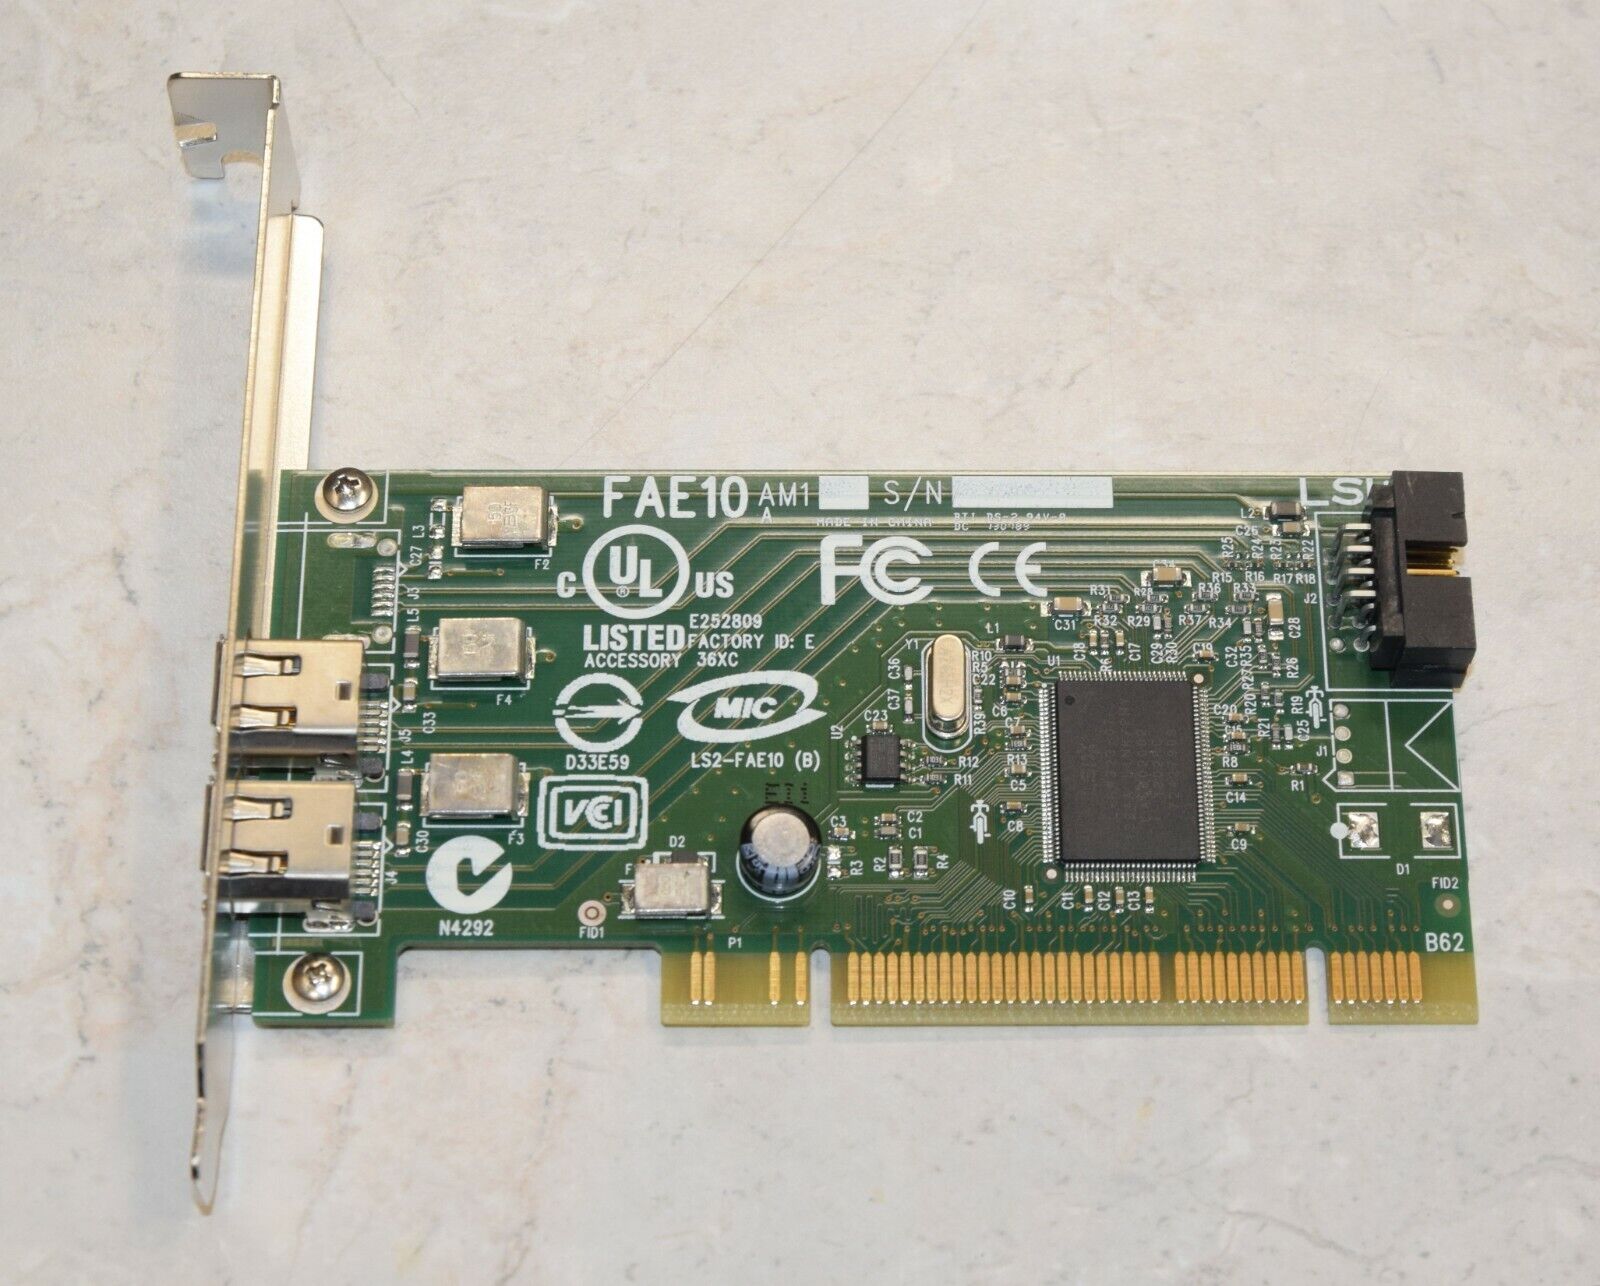 Dell LSI Full Height Dual Port 1394 Firewire 400 Card FAE10 H924H Used